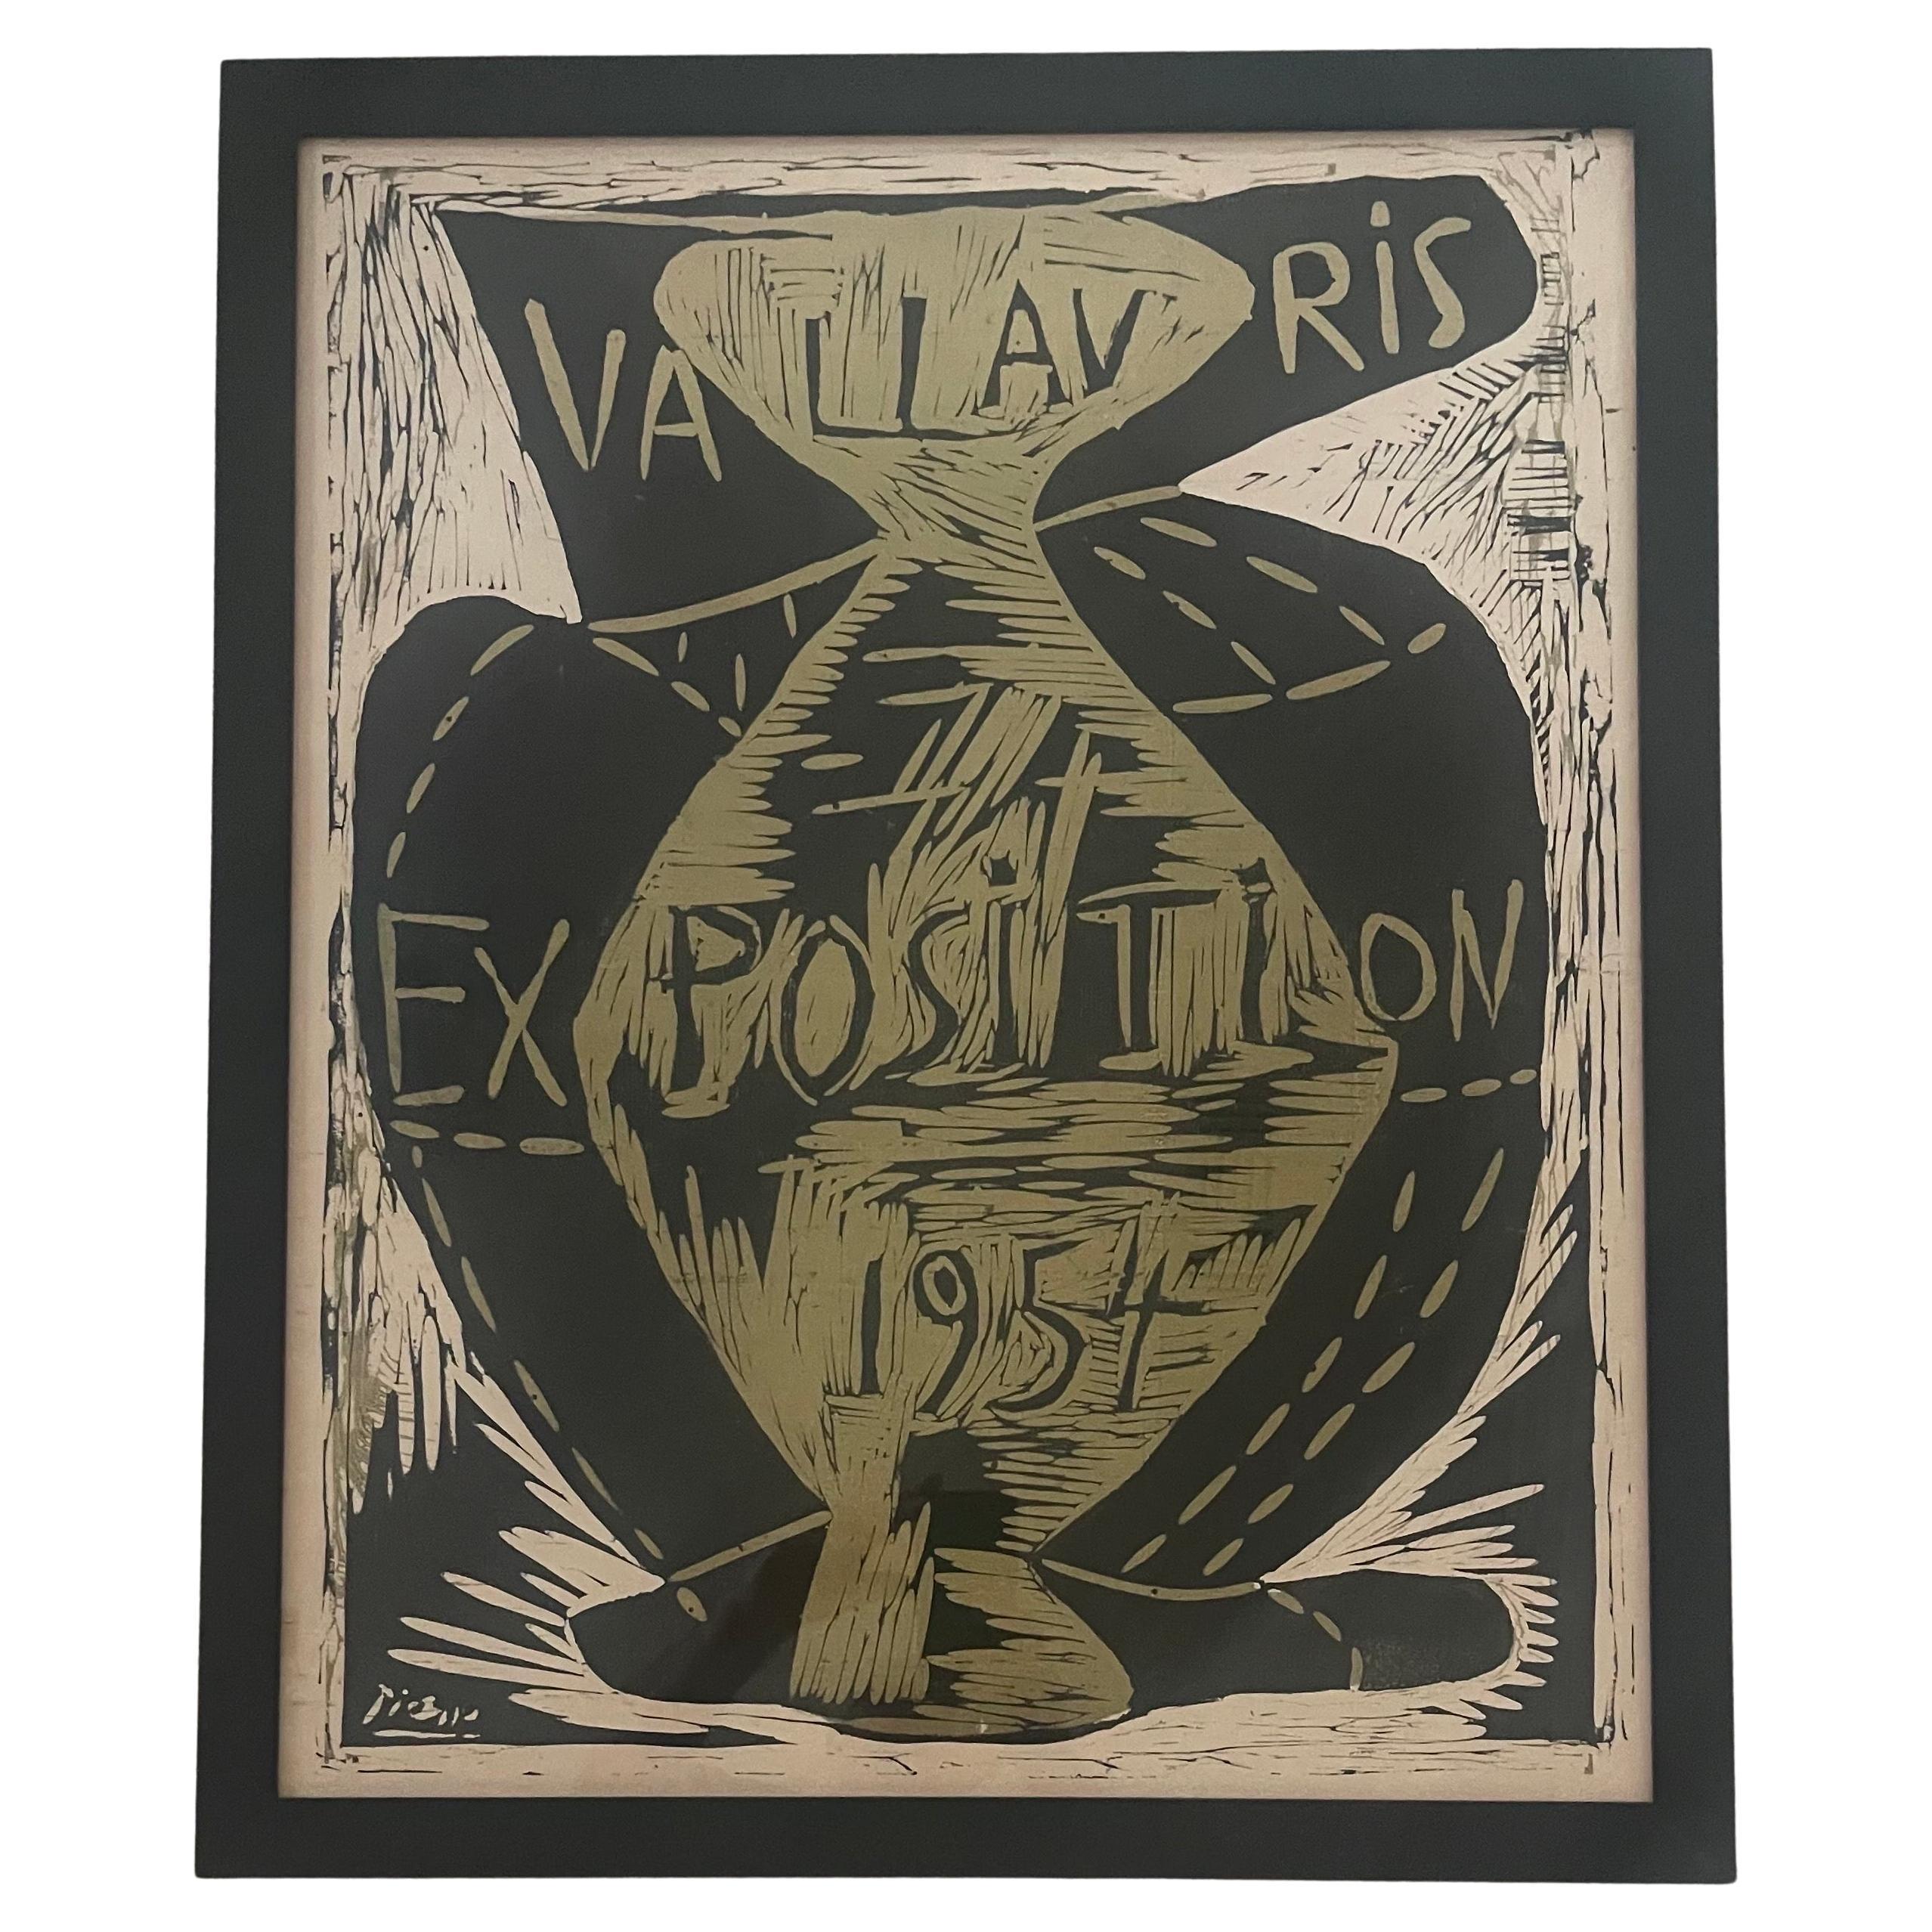 Rare Linocut Poster "Vallavris Exhibition 1954" by Pablo Picasso For Sale